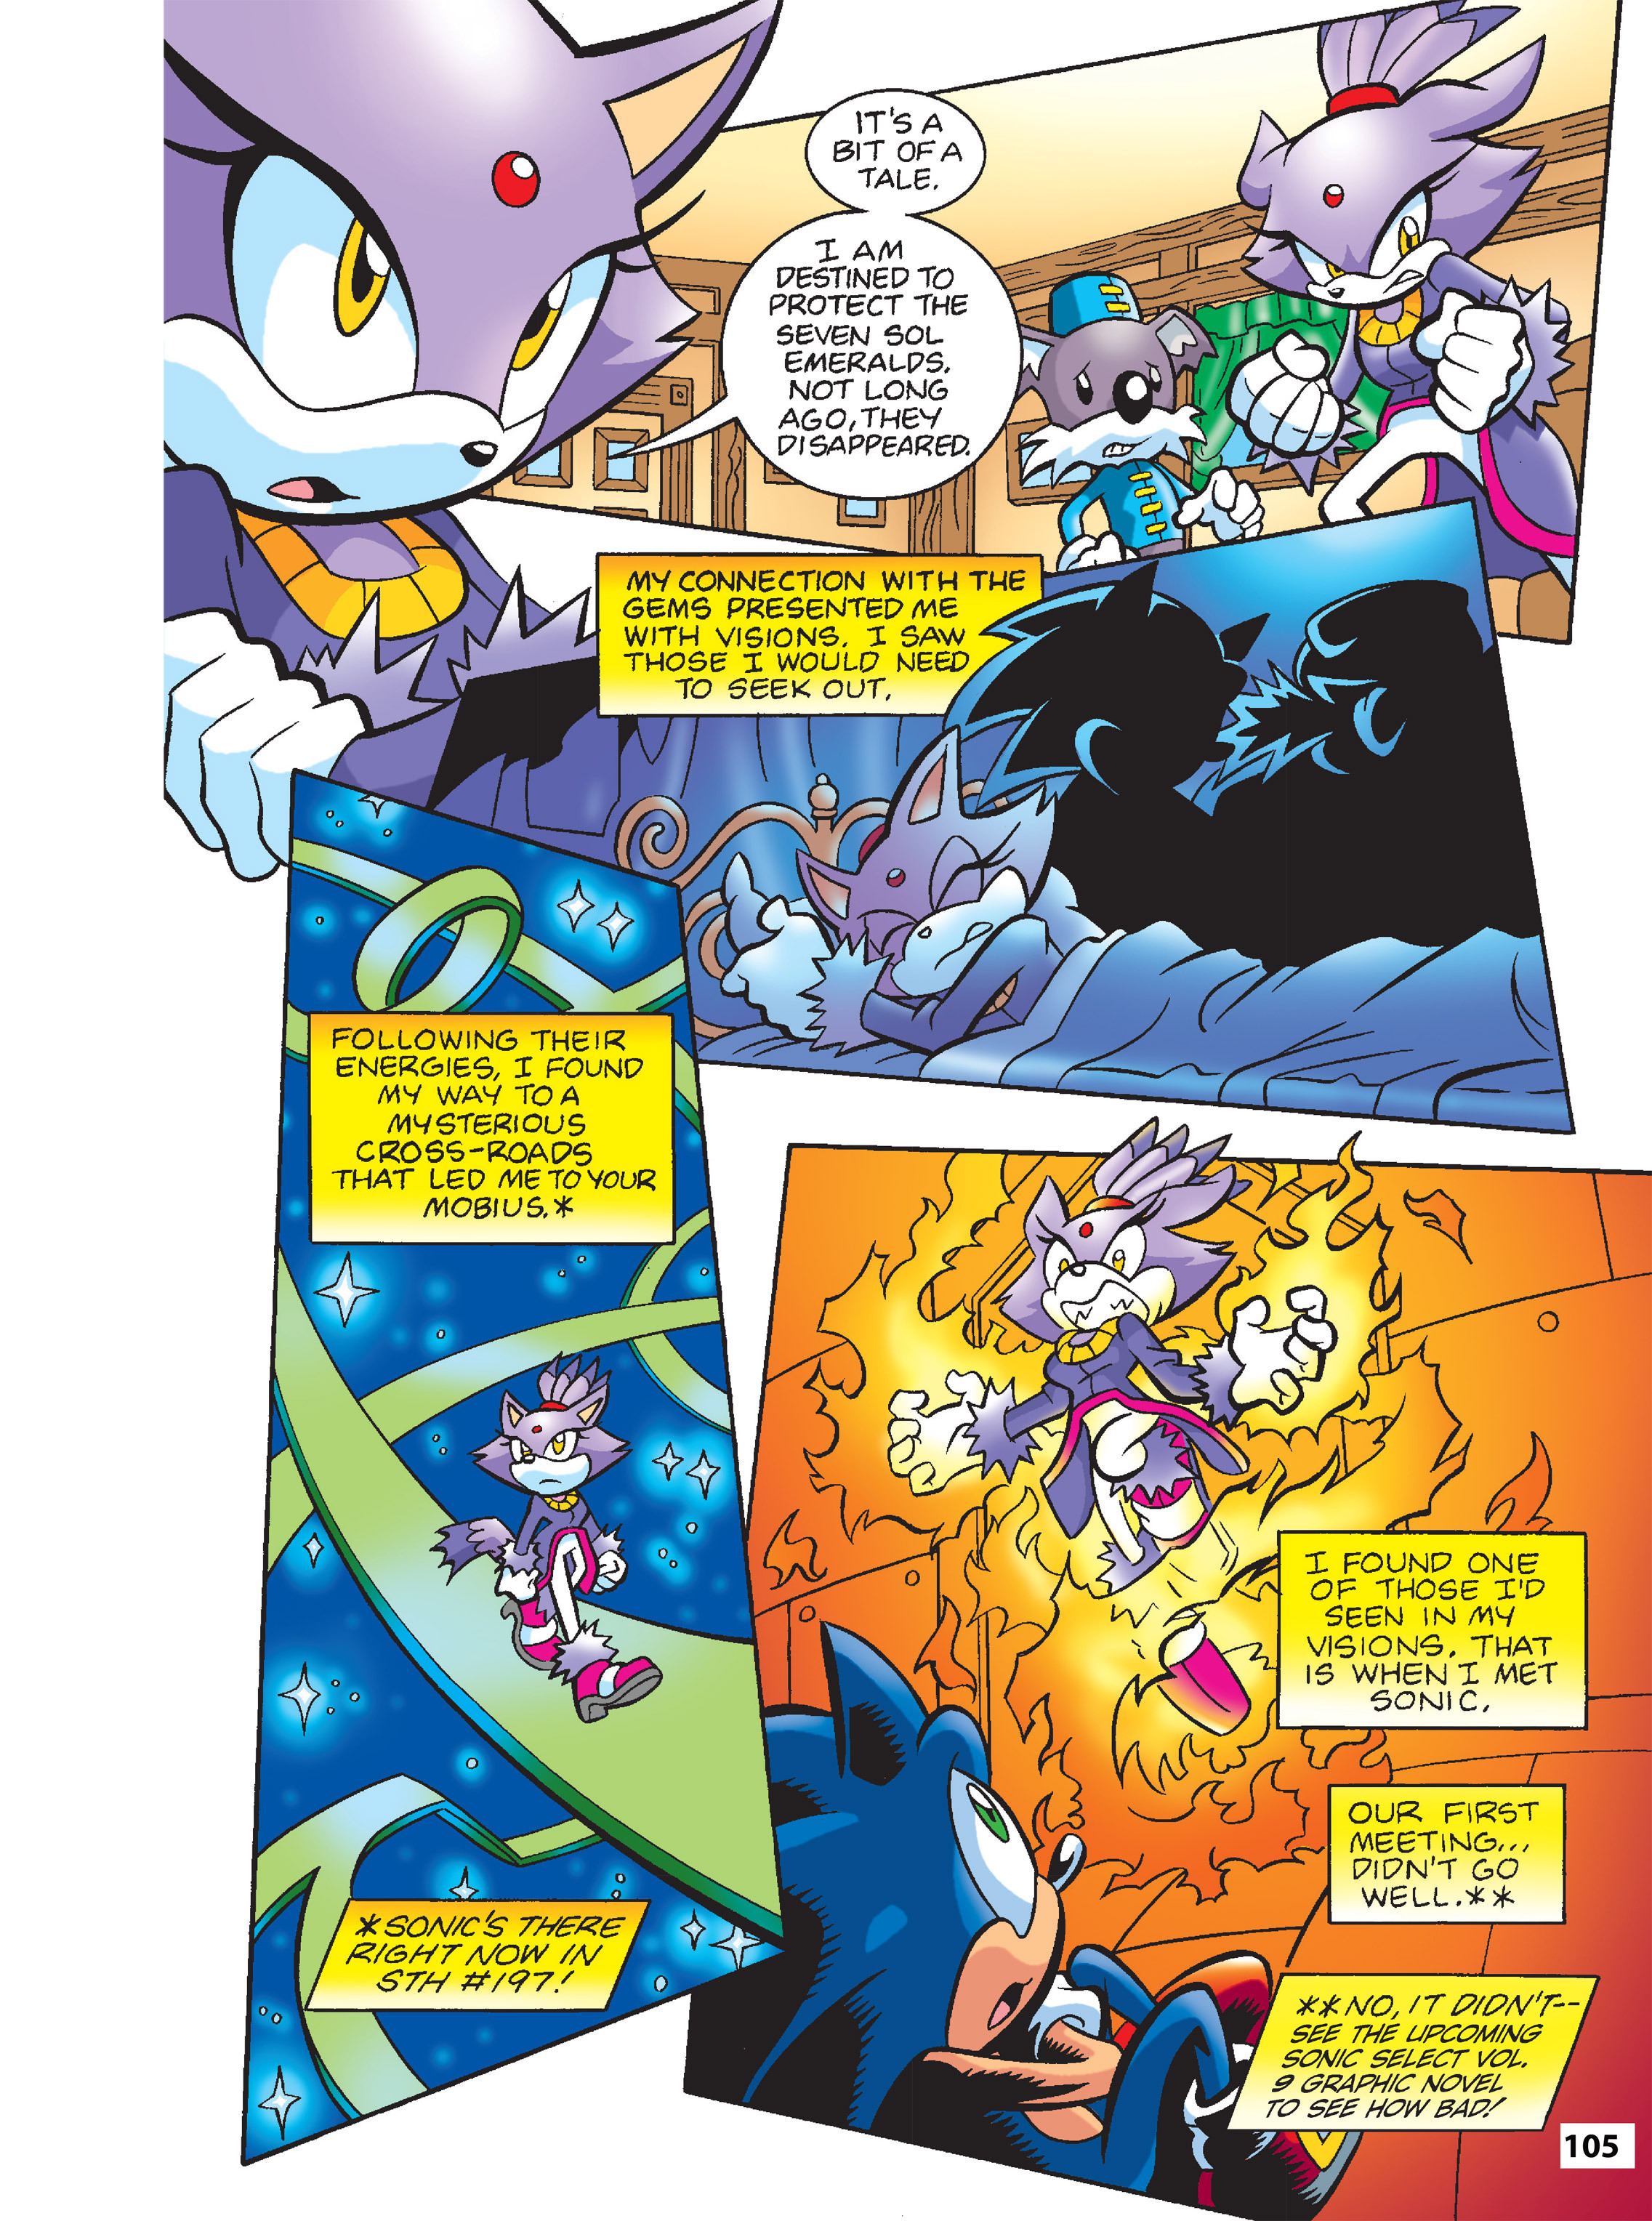 Exclusive: Revisit Your Favorite Hedgehog in “Sonic Super Special